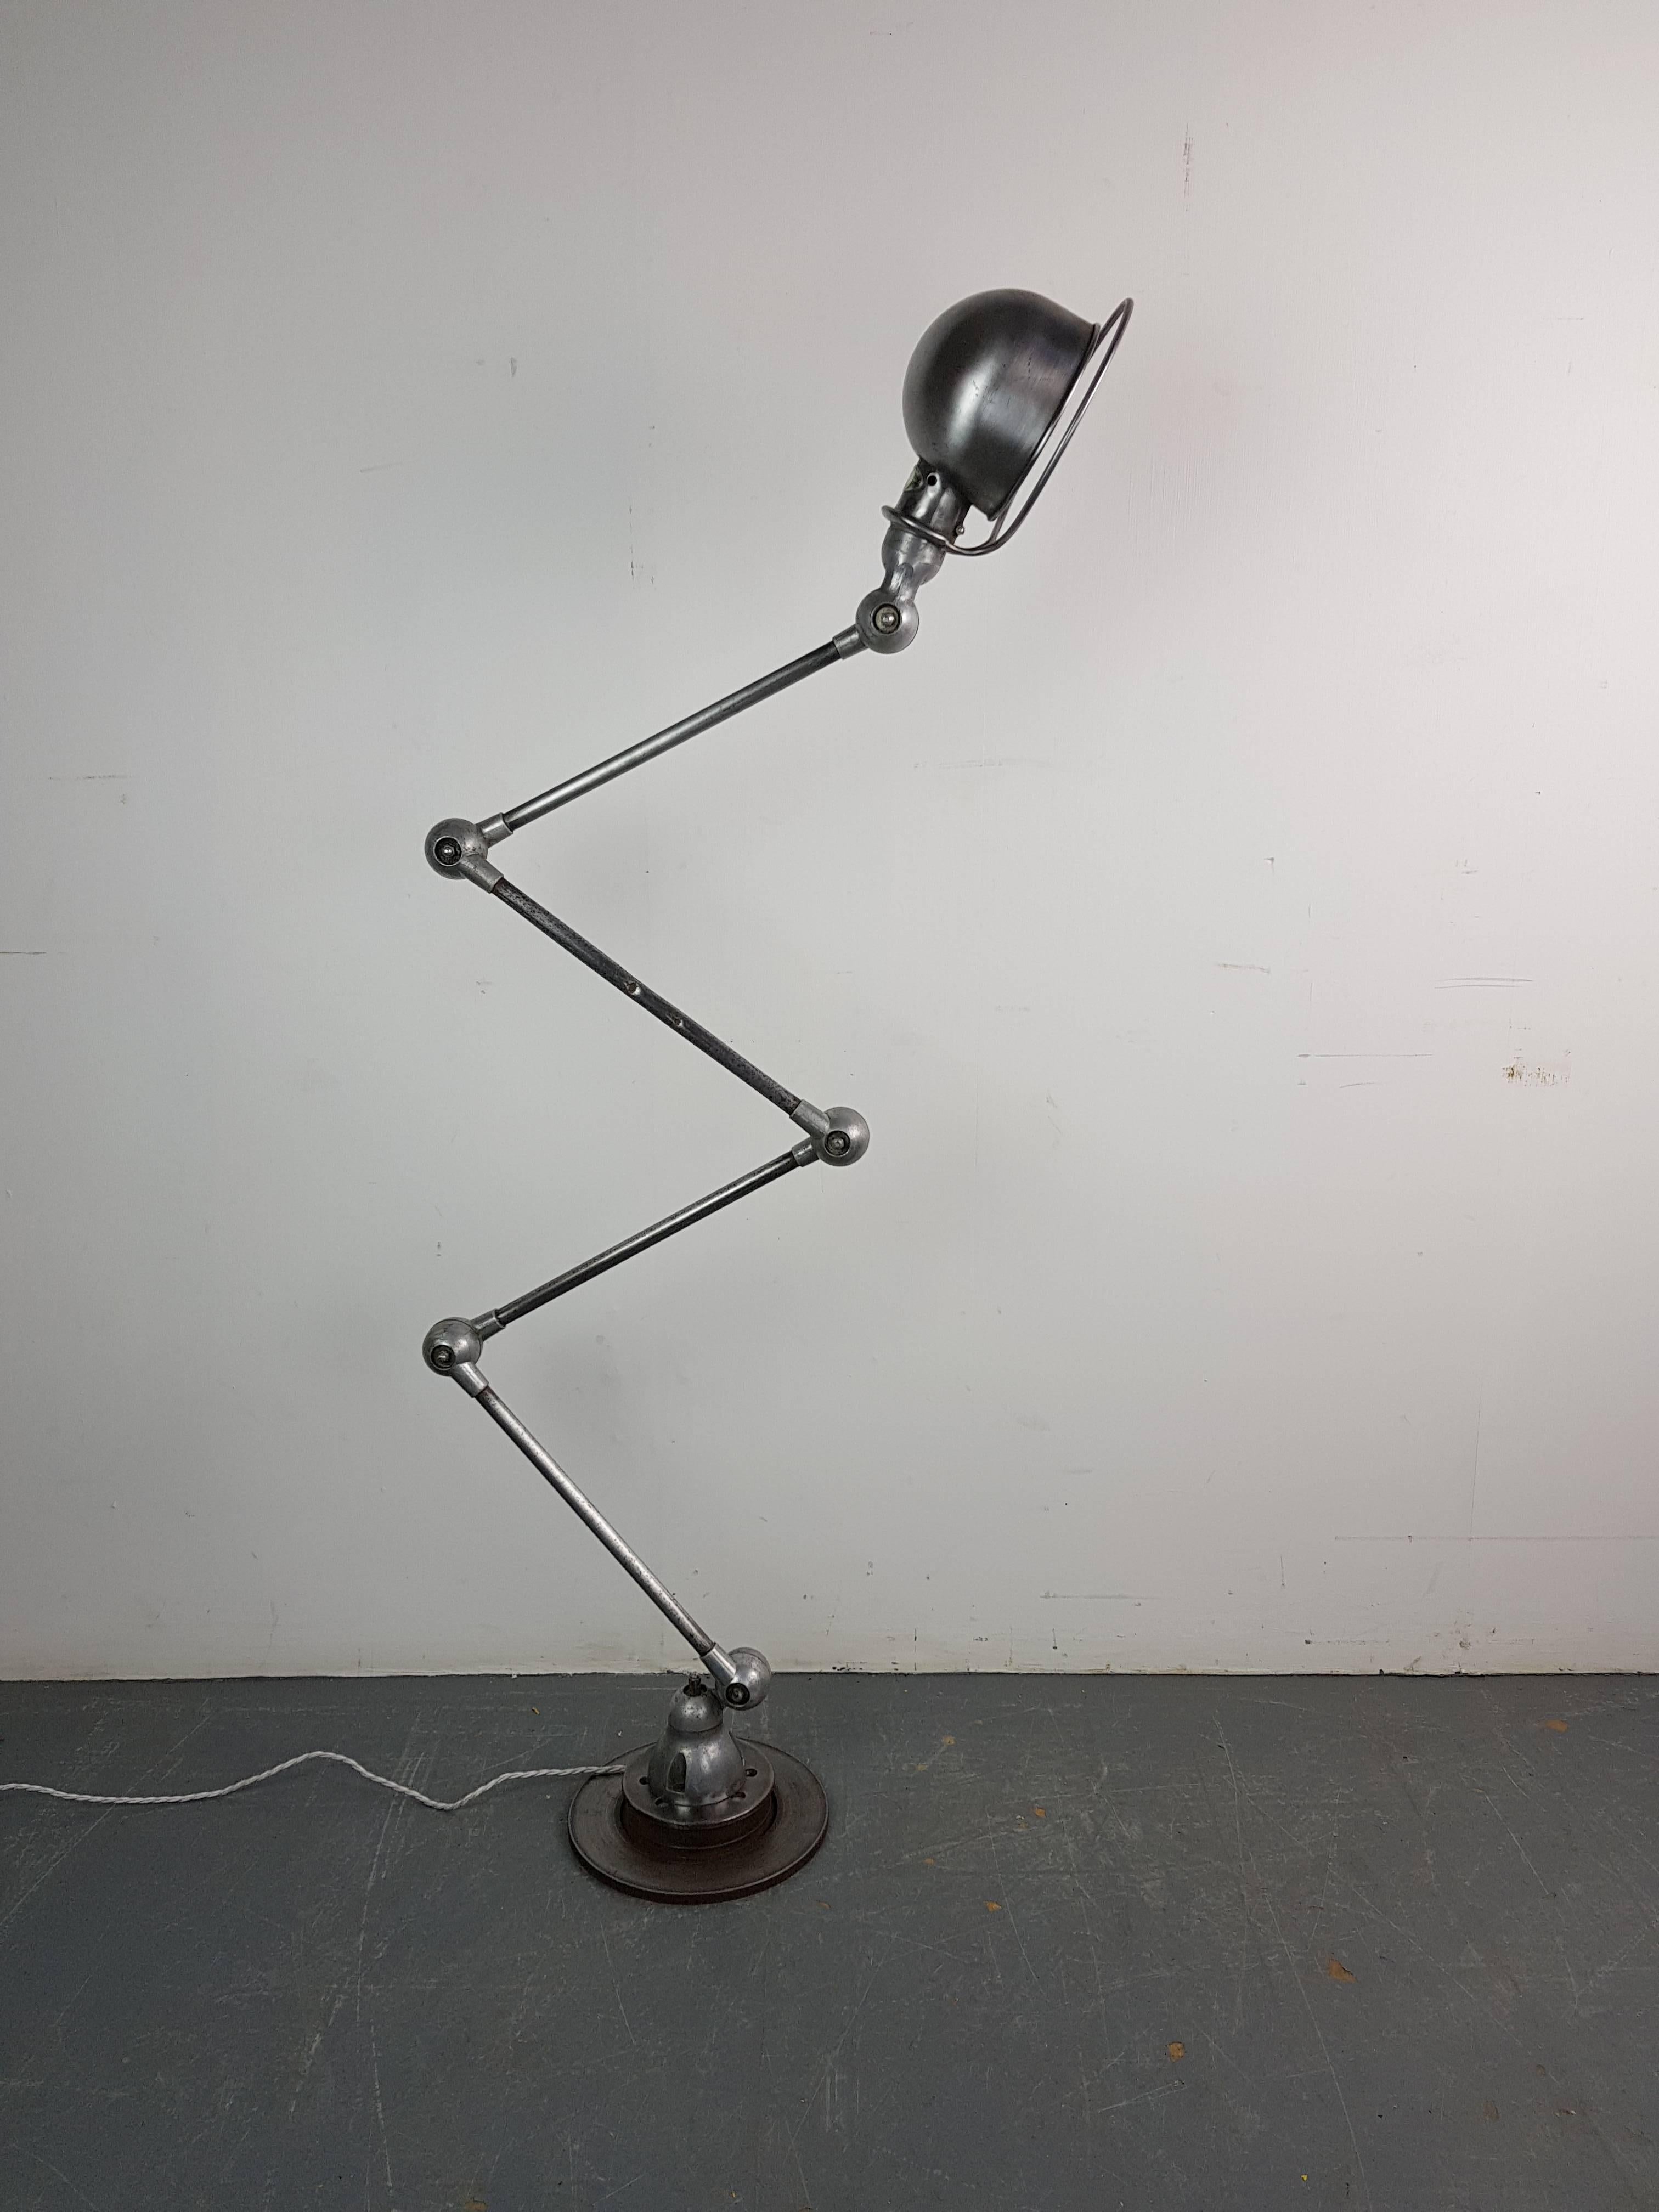 Fully refurbished, beautiful original stripped and polished Jielde floor lamp. Designed by the French engineer Jean-Louis Domecq in the 1950s to be used in factories as a work lamp. (The name 